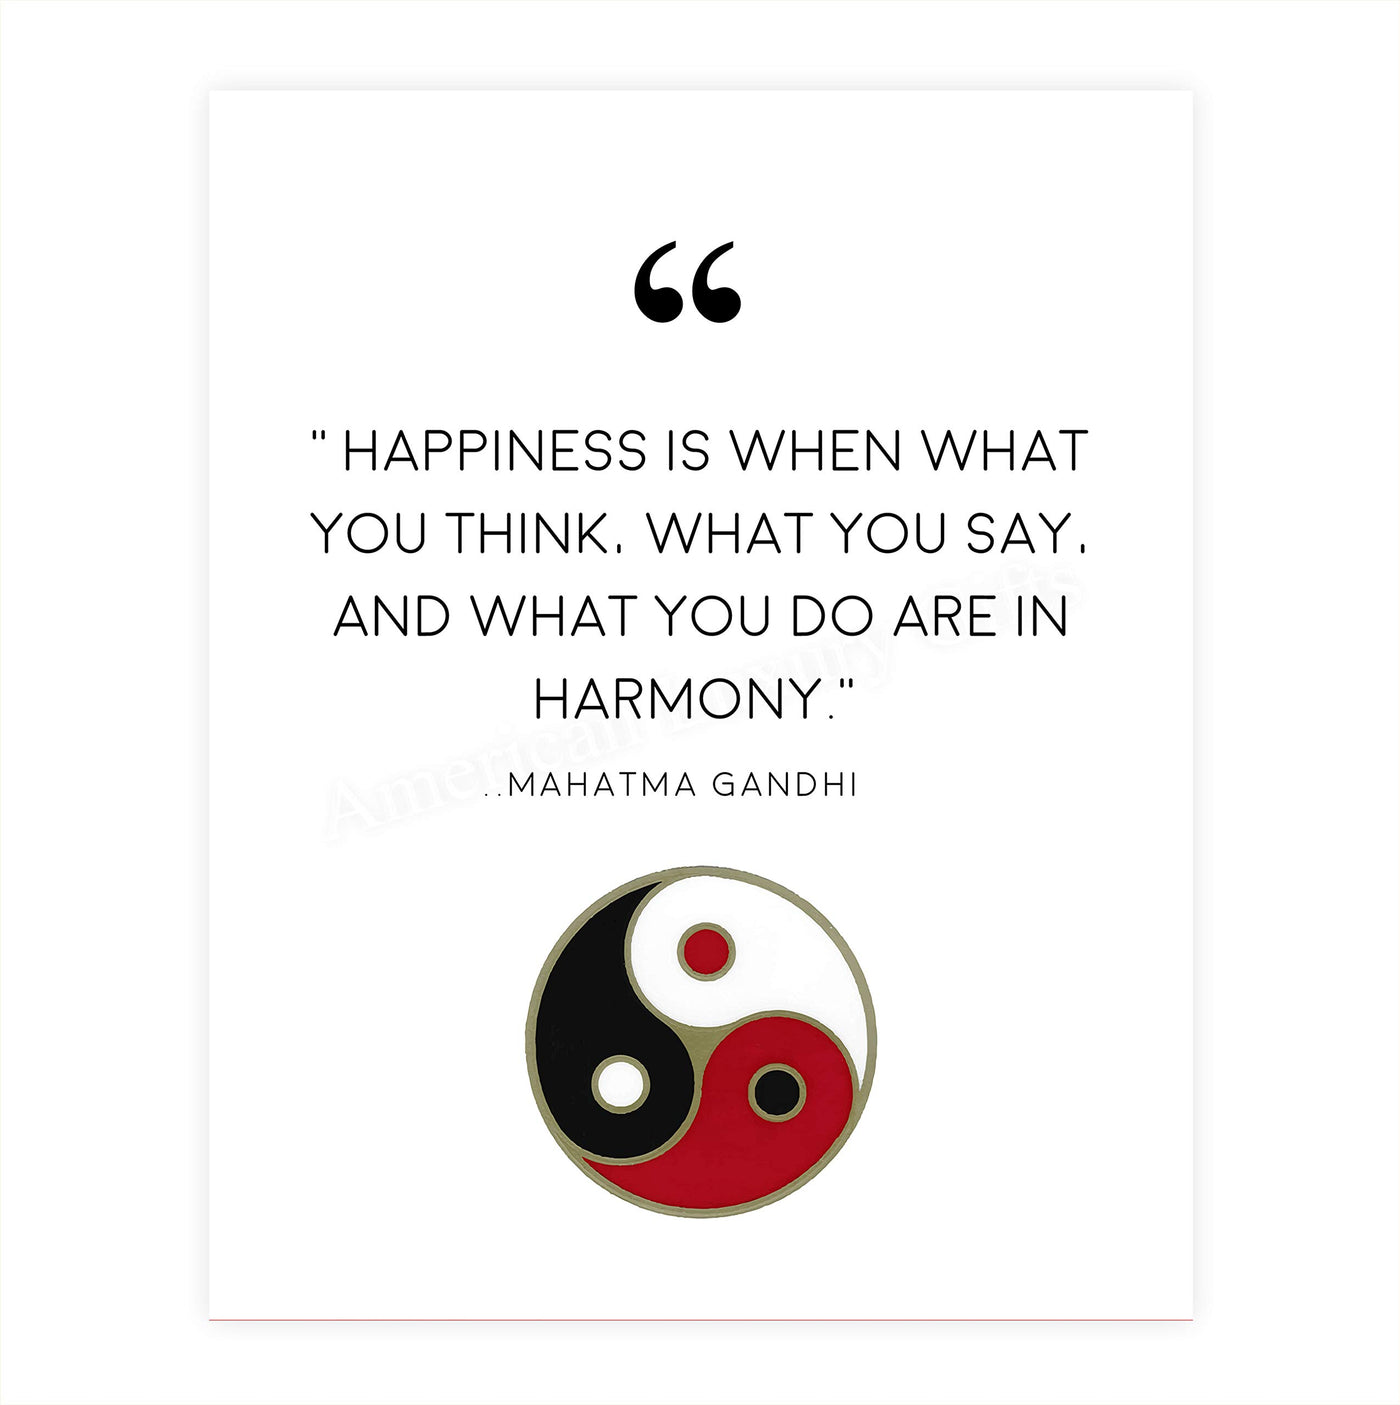 Mahatma Gandhi Quotes-"Happiness-When What You Think-Say-Do In Harmony"-8x10" Spiritual Wall Art Print-Ready to Frame. Modern Home-Studio-Office Decor. Perfect Gift for Motivation, Zen & Inspiration!